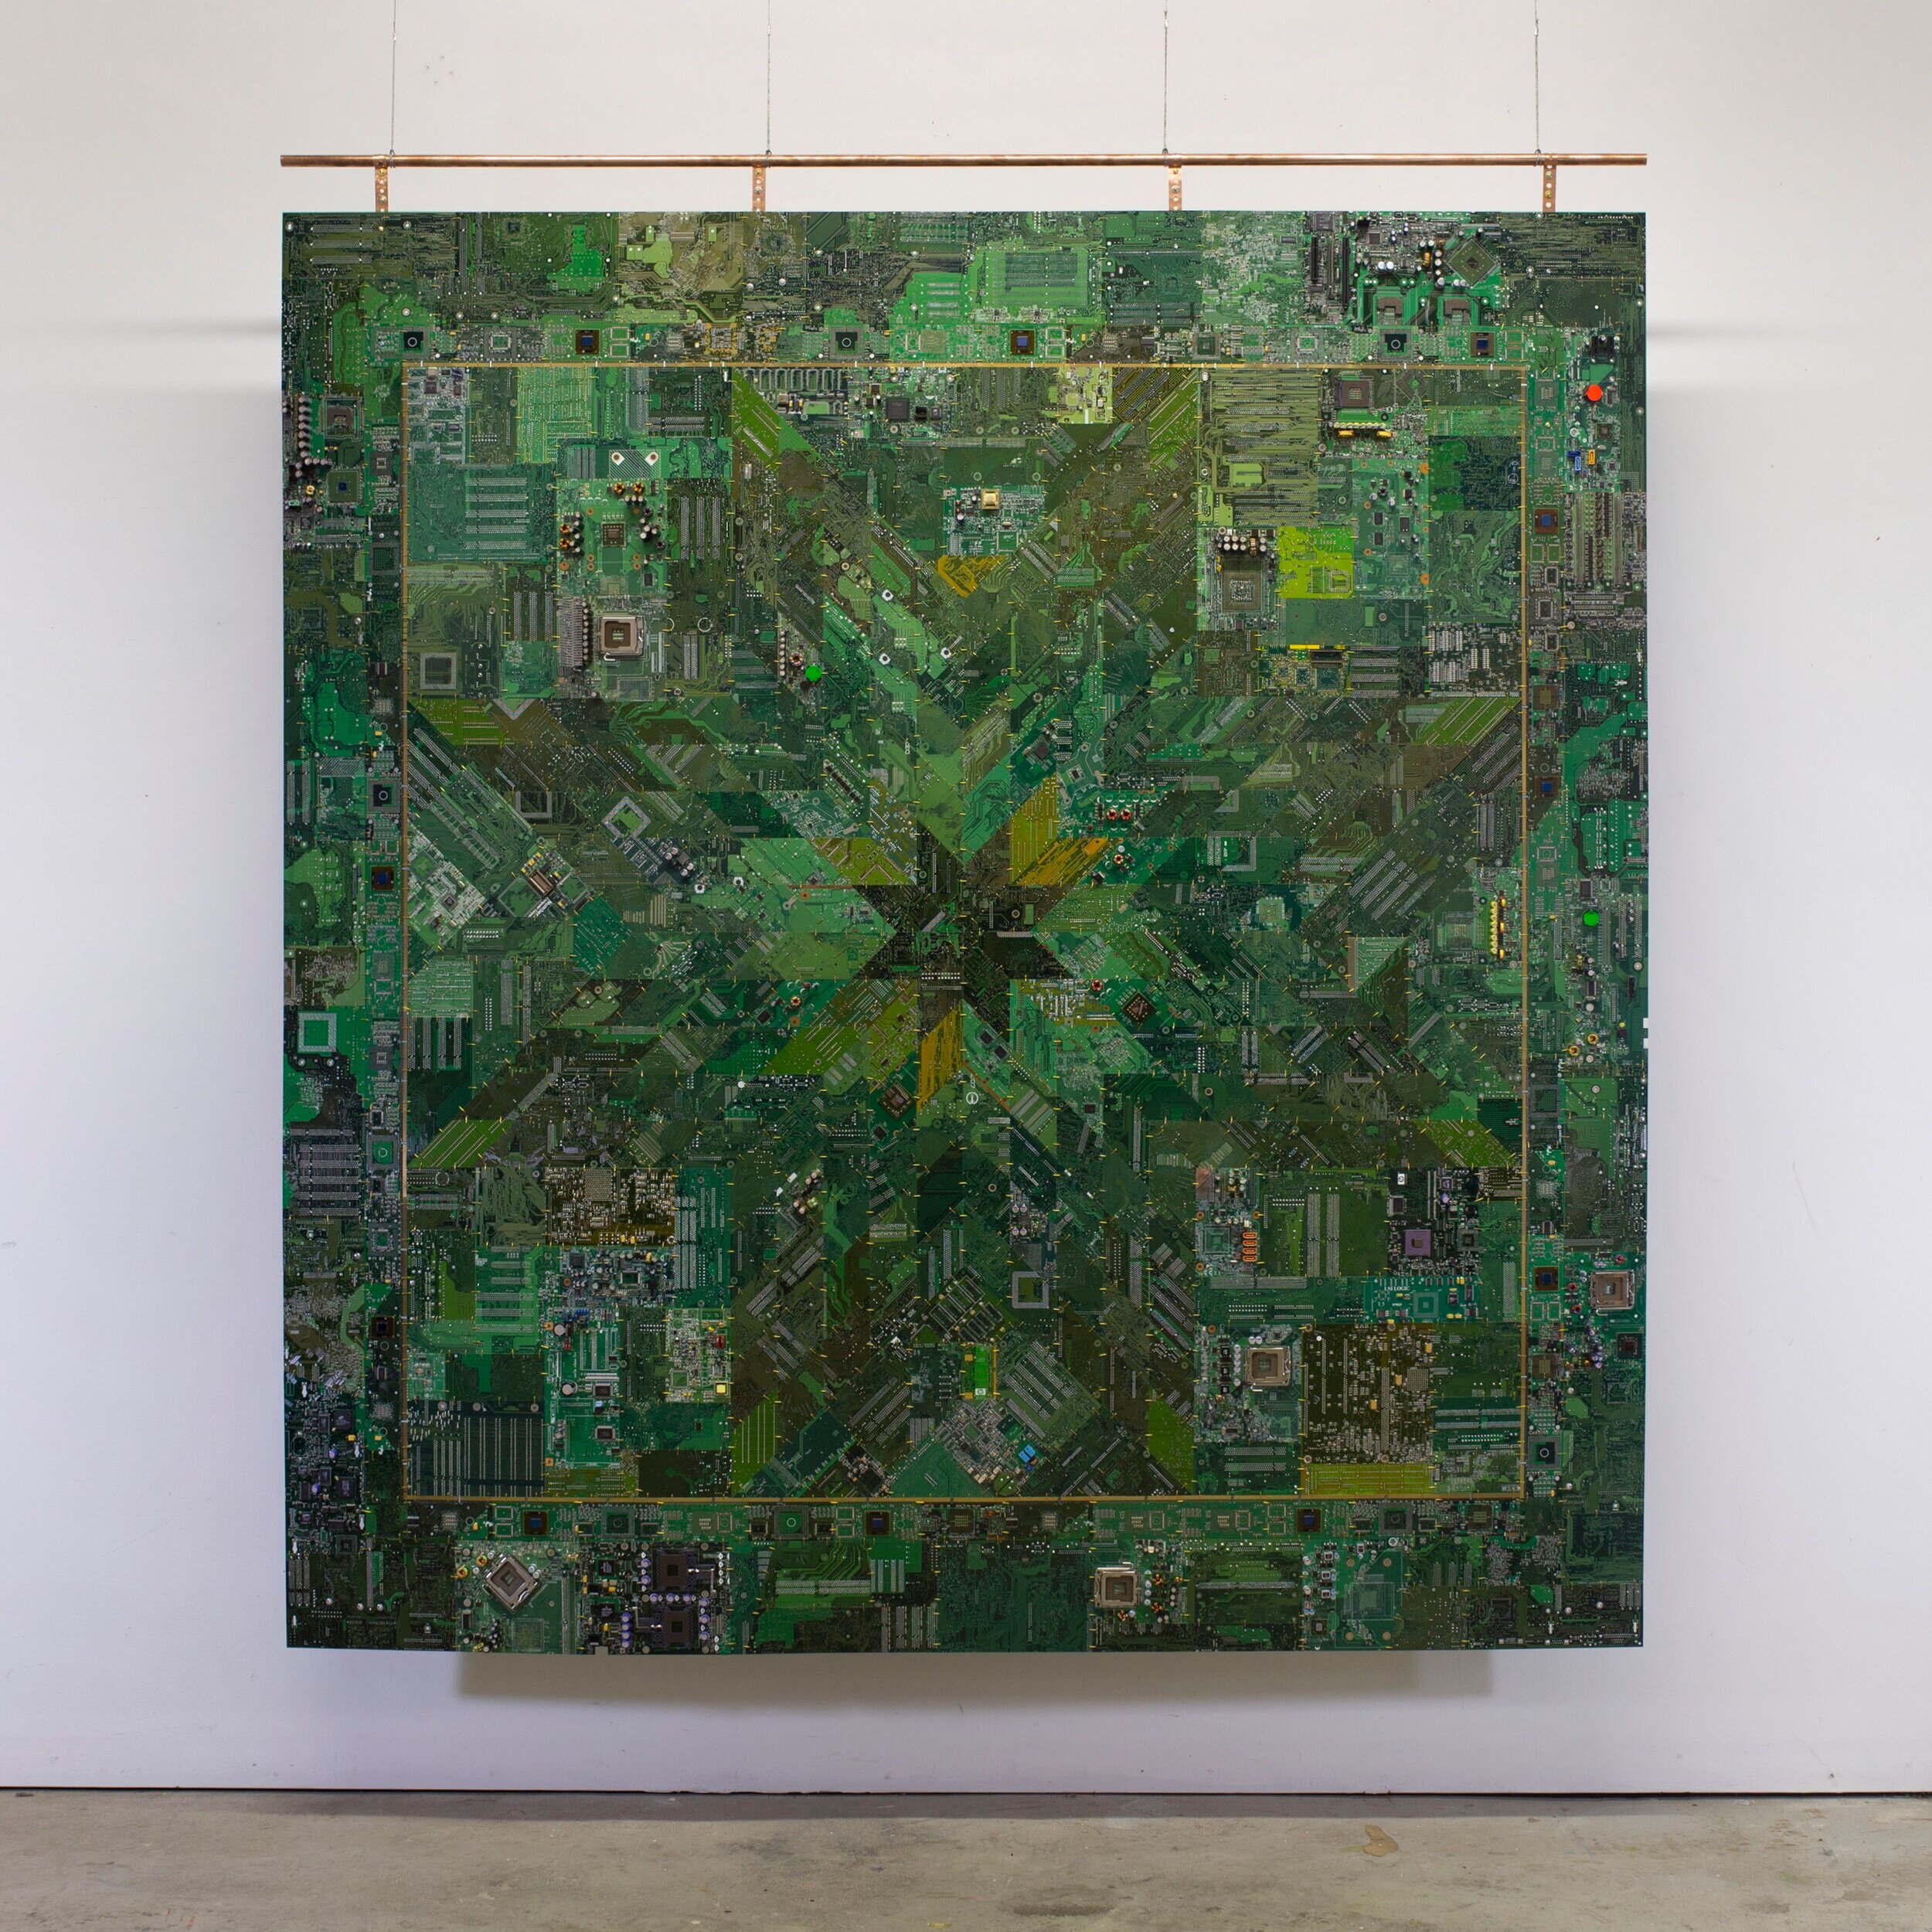   Green Star Quilt , 2019, Circuit boards, brass wire, and copper tube, 193 x 179 cm. COURTESY OF KT KANAZAWICH  